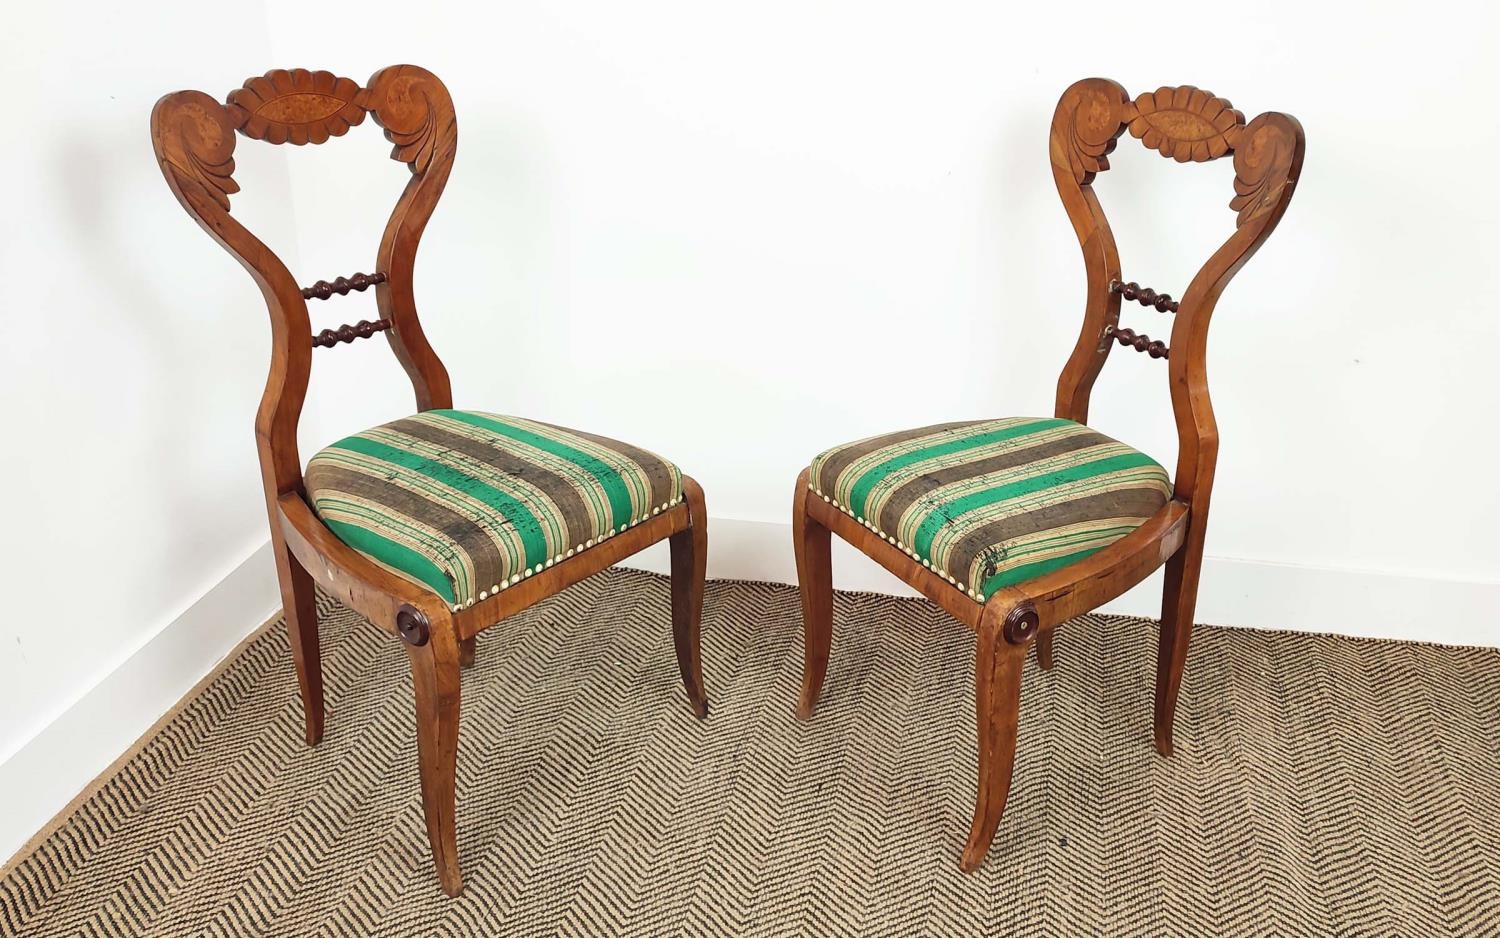 SIDE CHAIRS, a pair, Biedermeier cherrywood and thuya with worn green and brown striped drop in